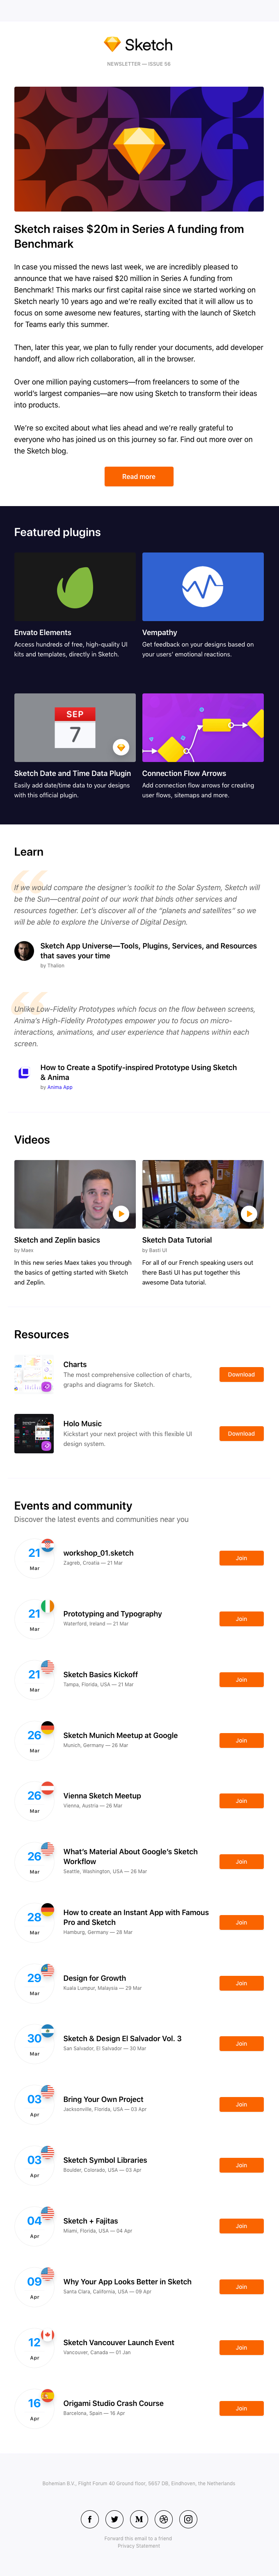 Sketch raises $20m in Series A funding plus an official Sketch Data plugin, emotion based user feedback and more! - Sketch Email Newsletter